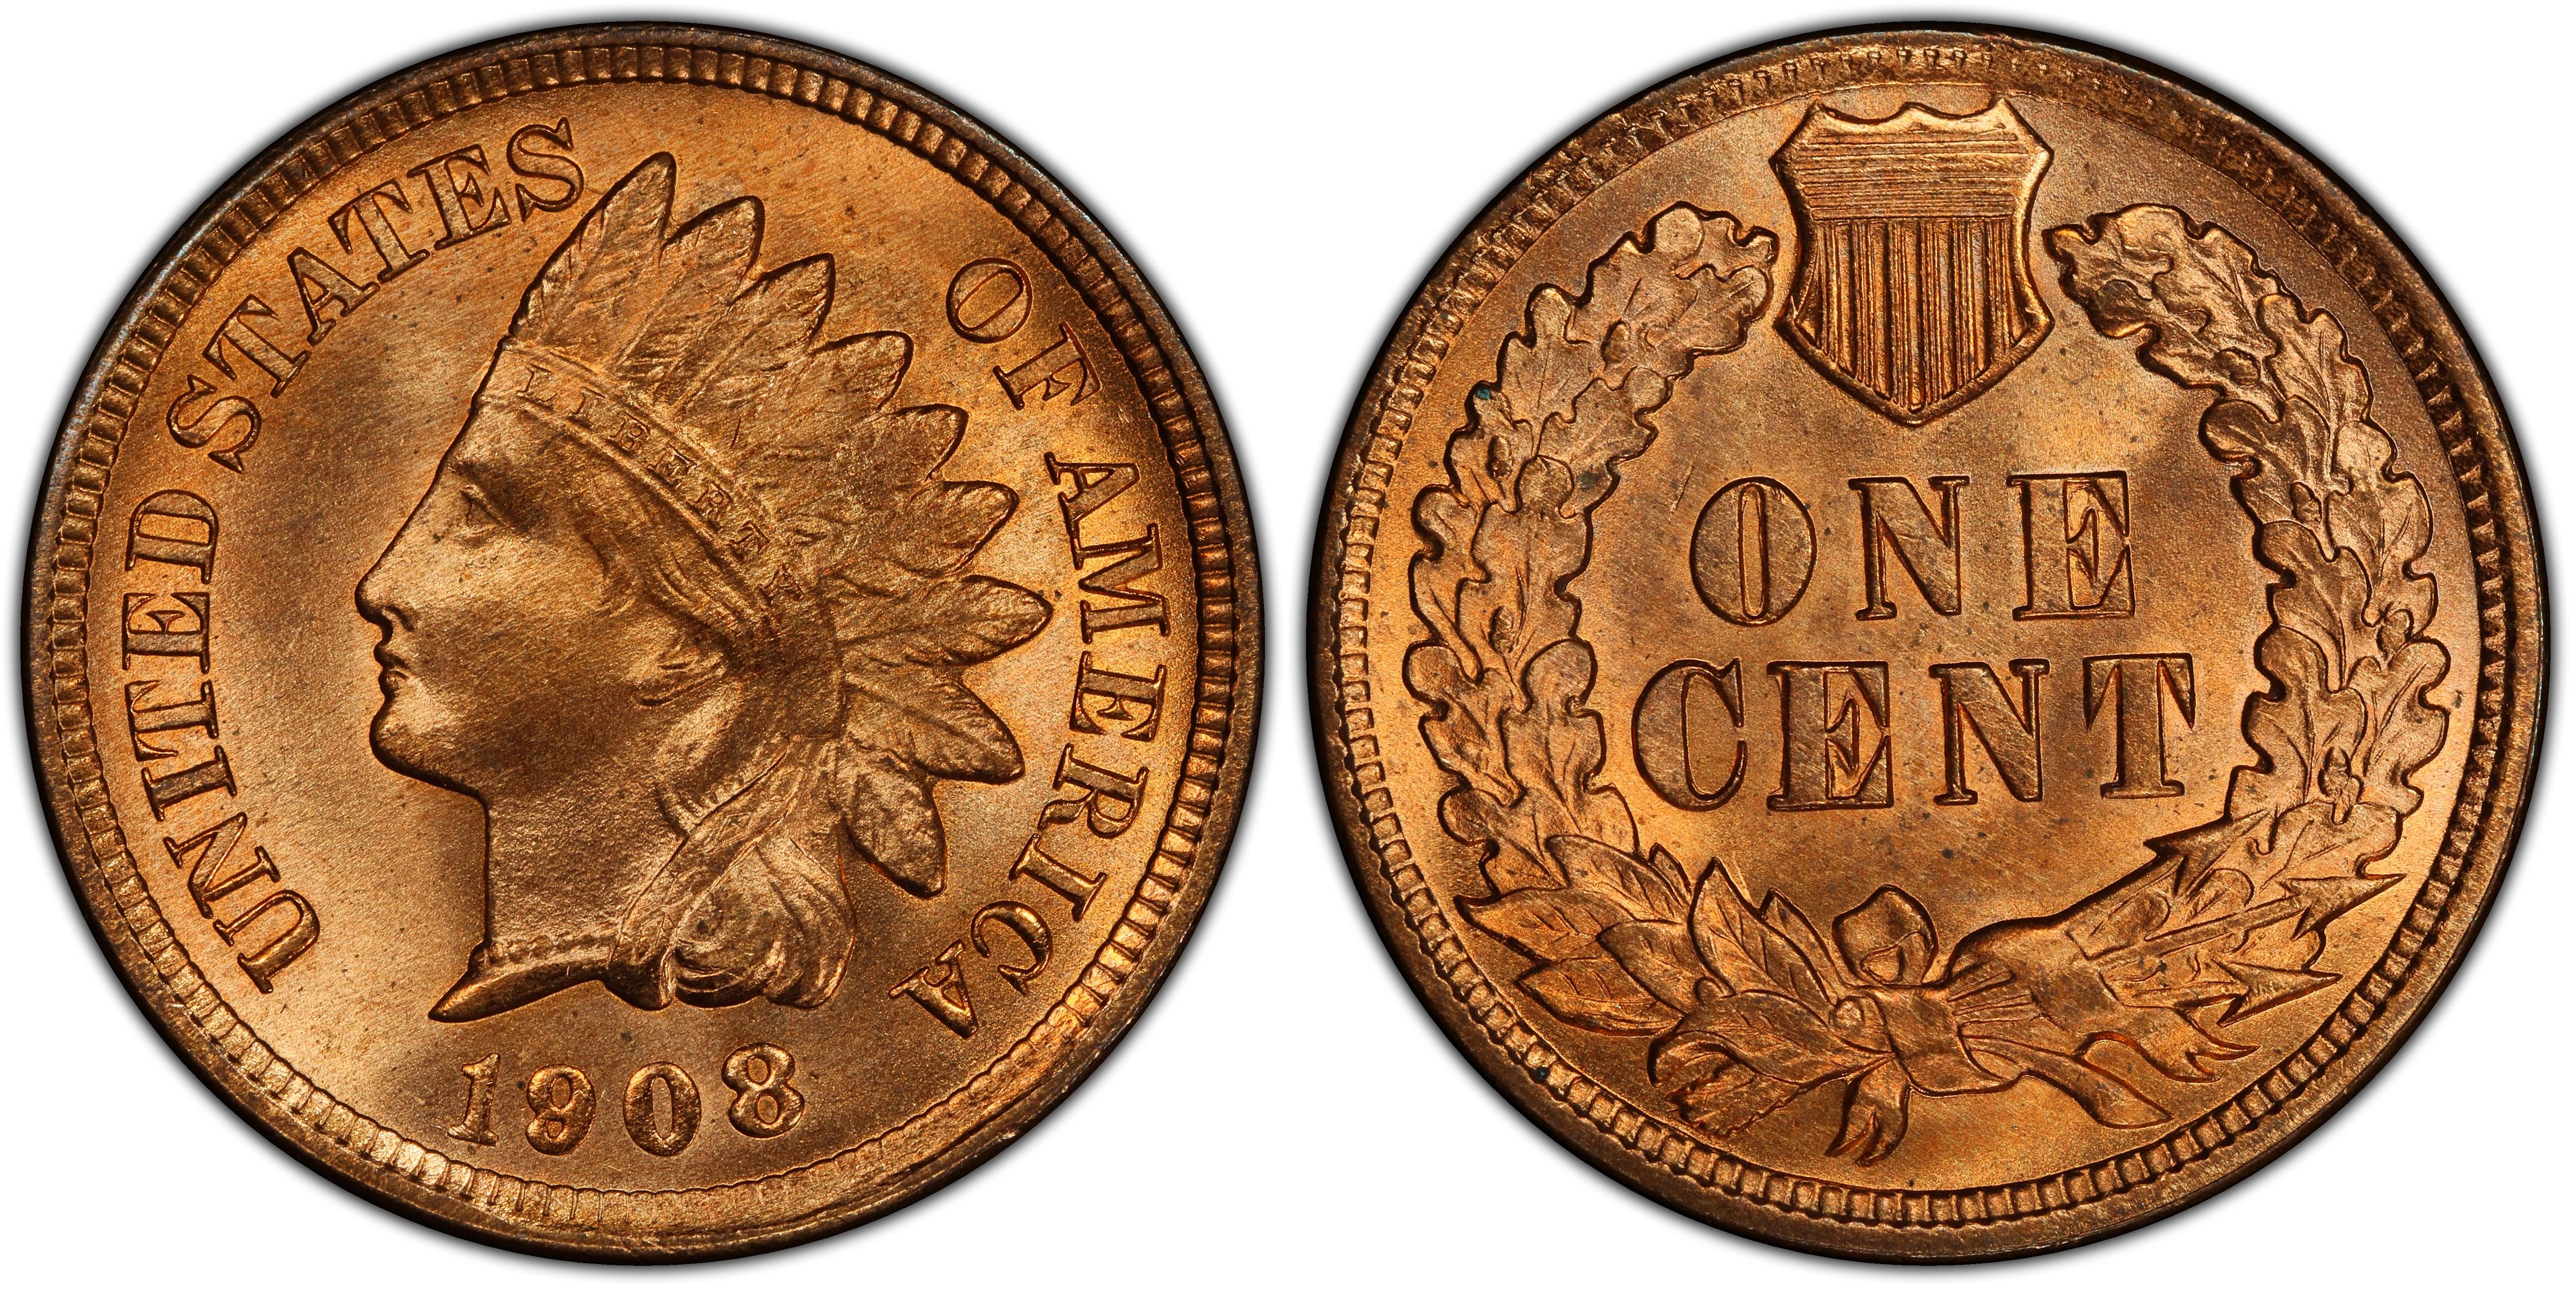 https://images.pcgs.com/CoinFacts/43538597_232121818_2200.jpg